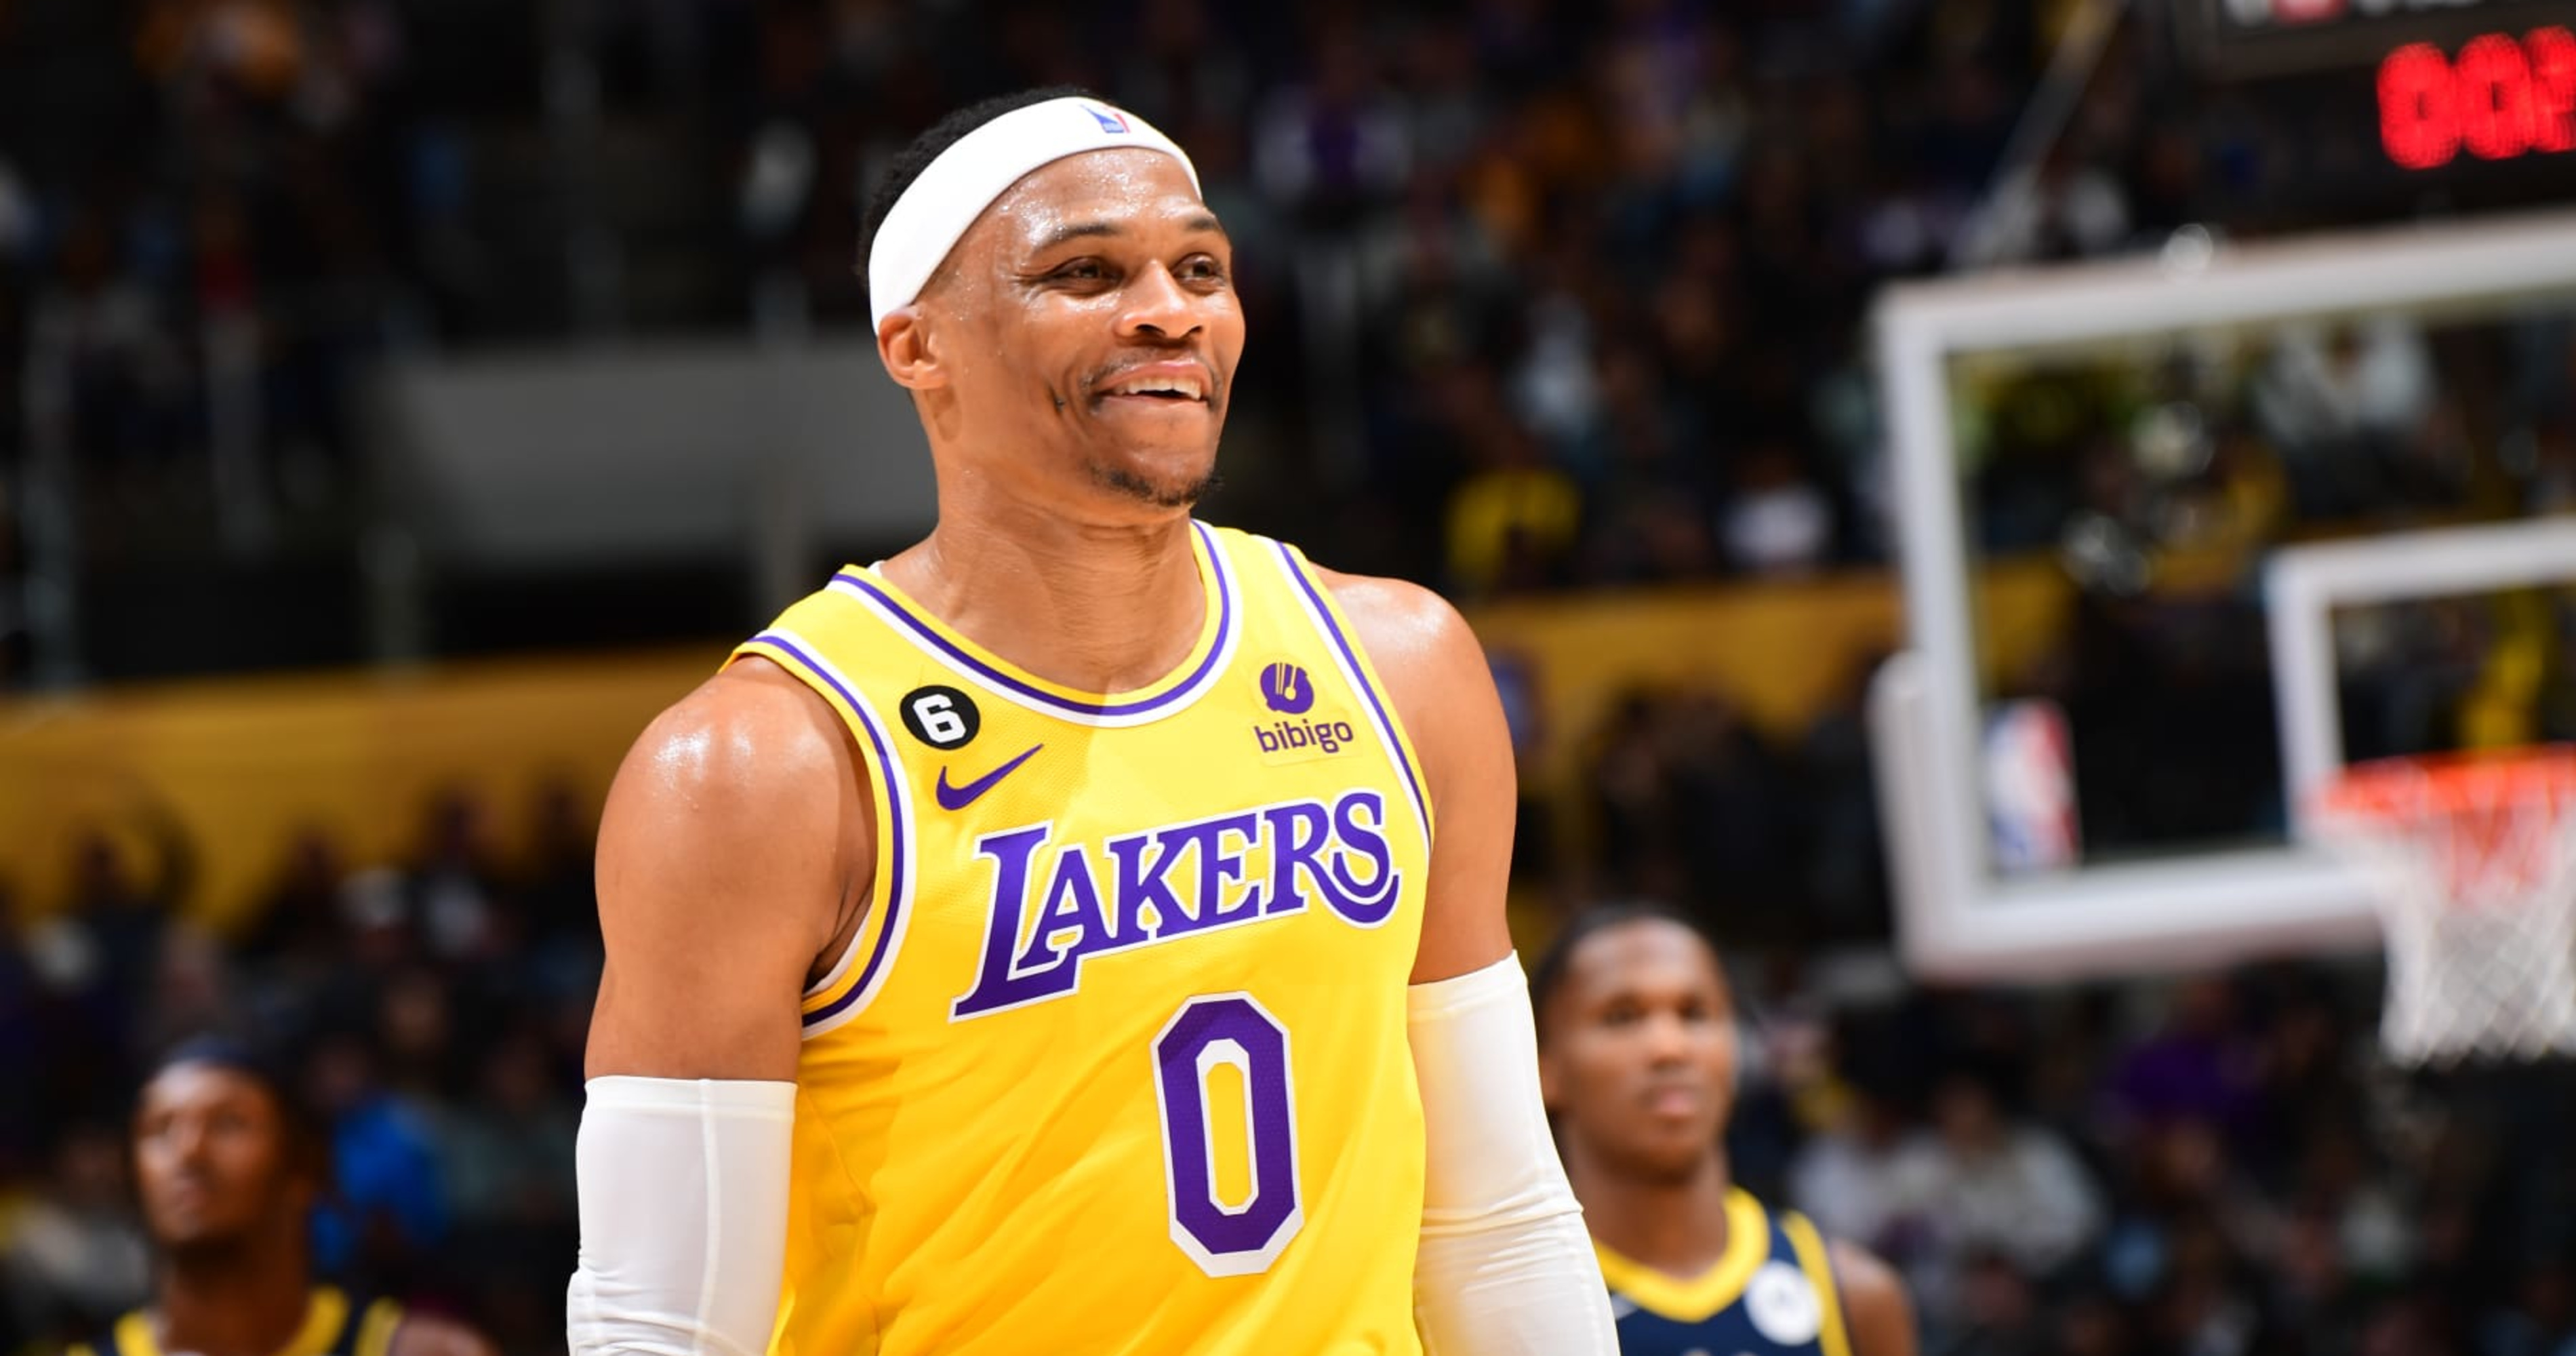 Lakers rumors: The team's sign-and-trade options